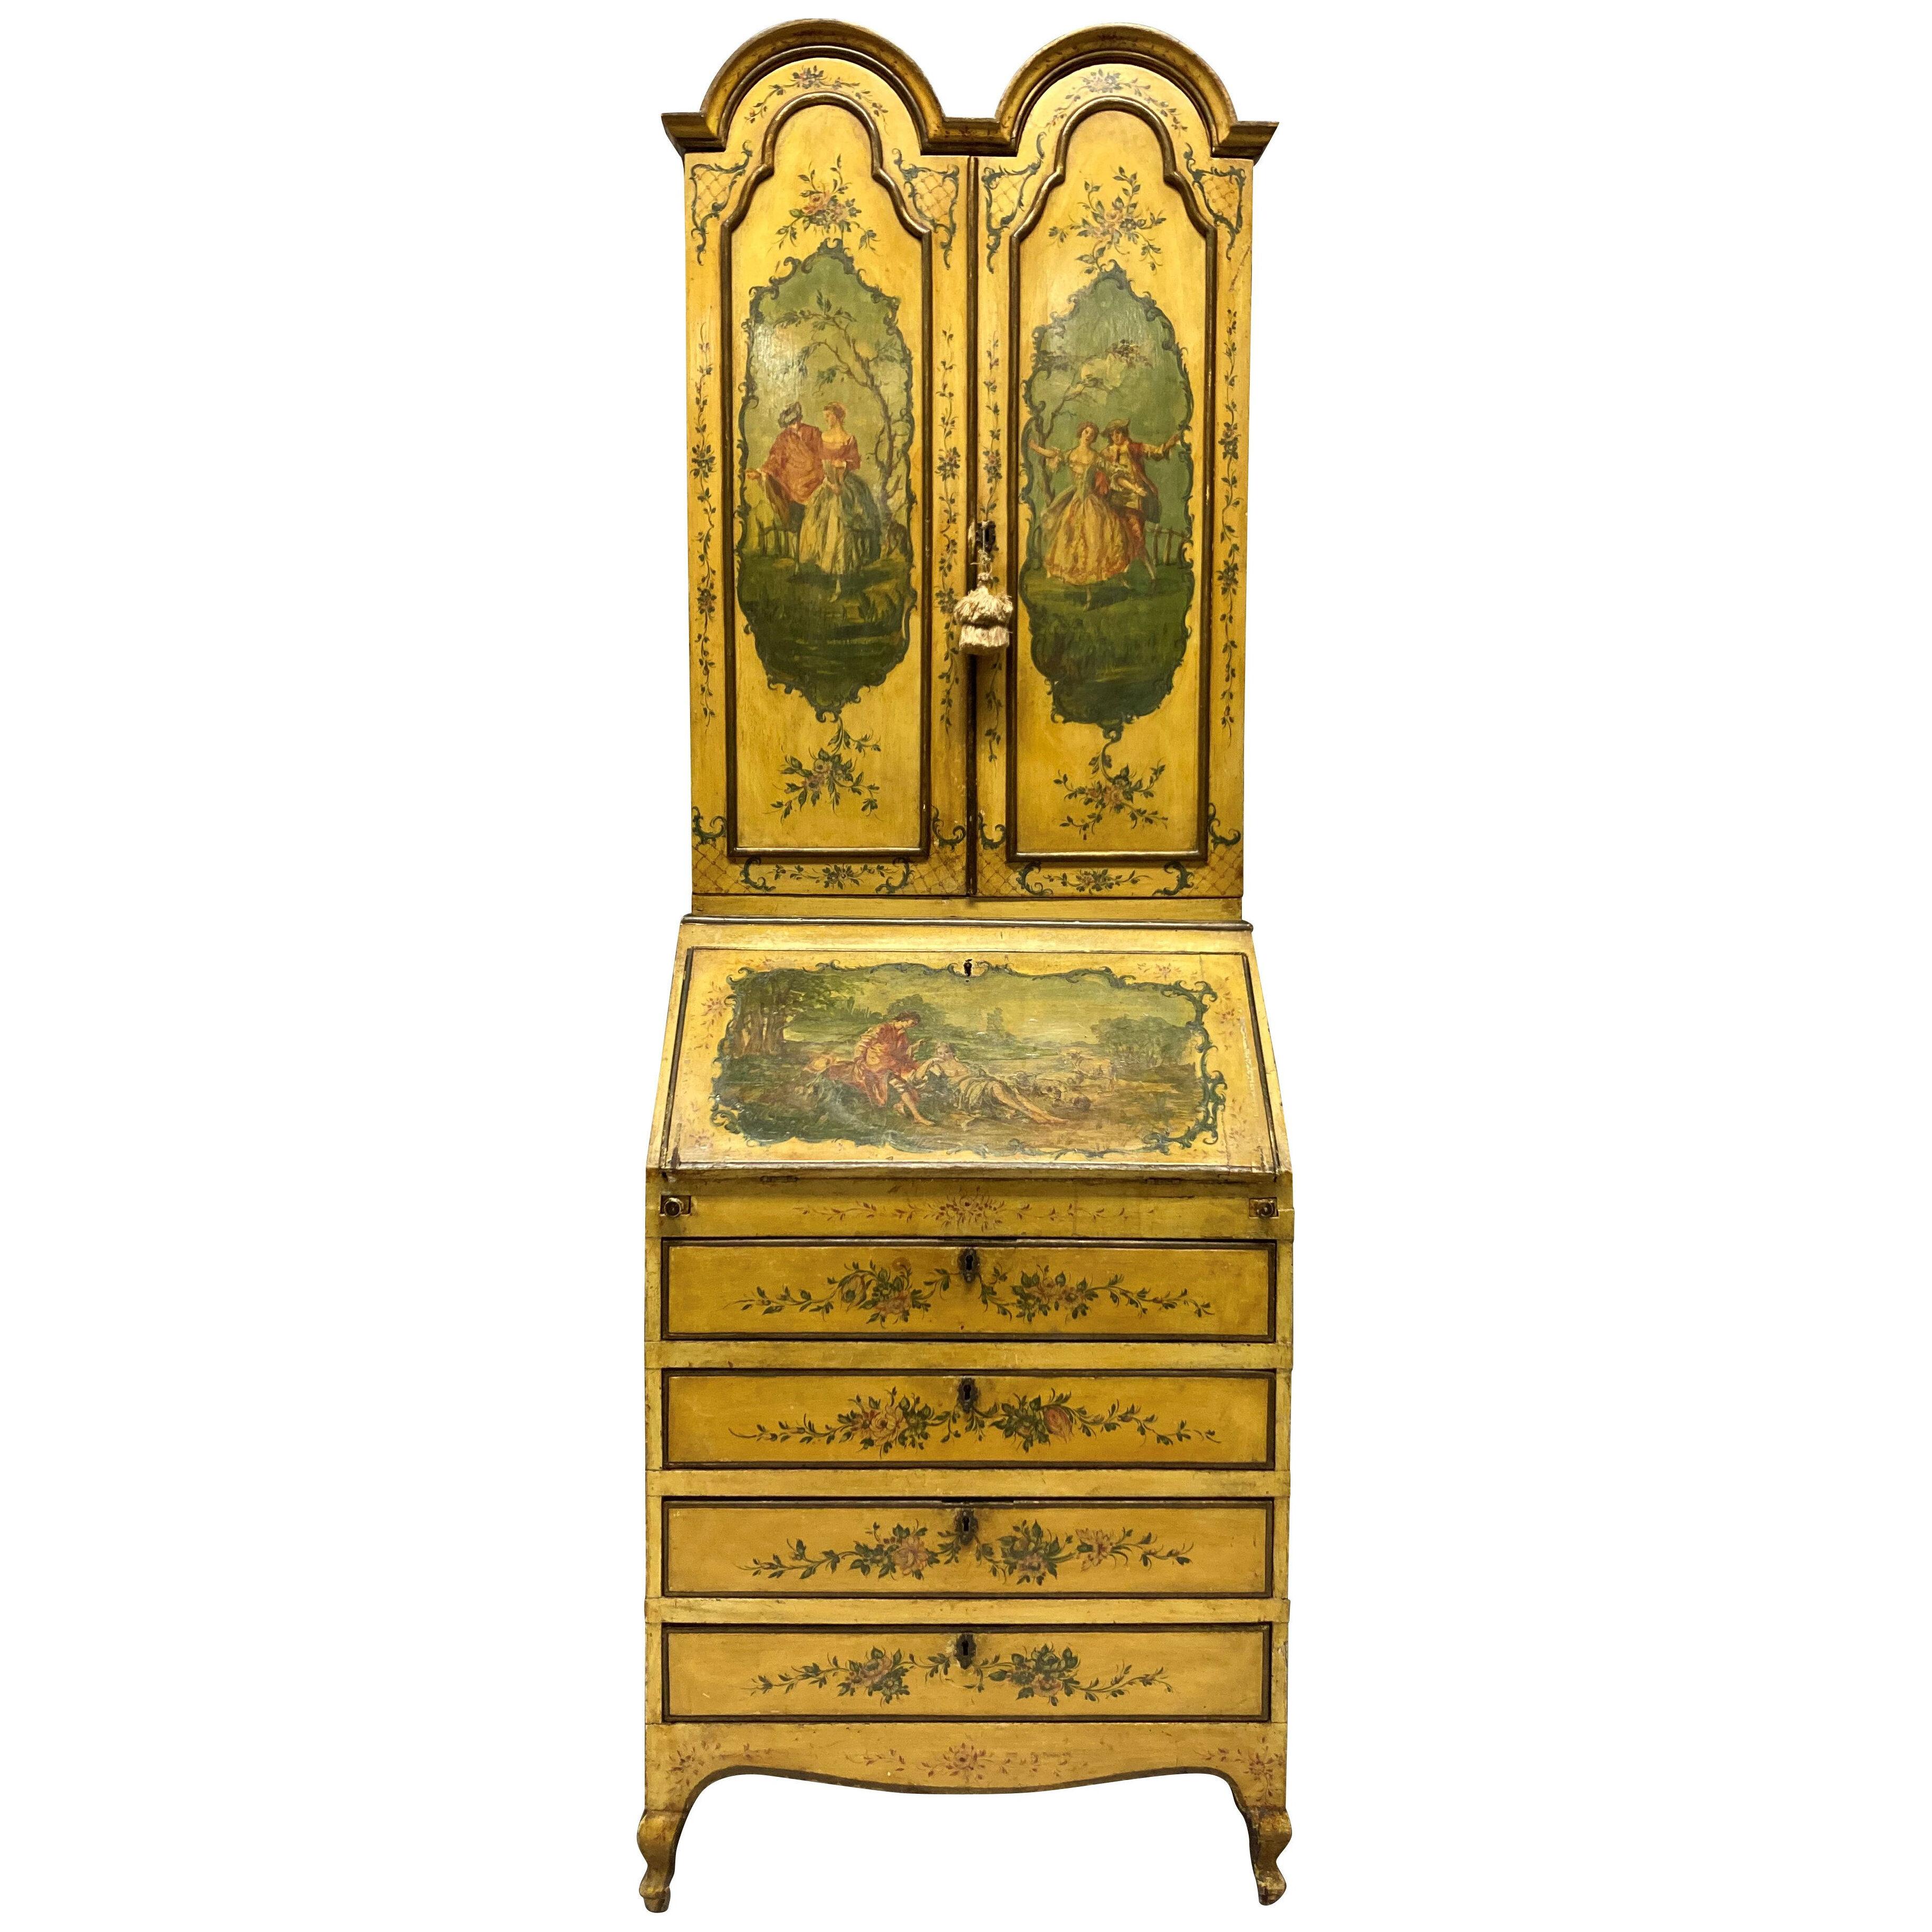 A VENETIAN SECRETAIRE CABINET IN HAND PAINTED YELLOW LACQUER